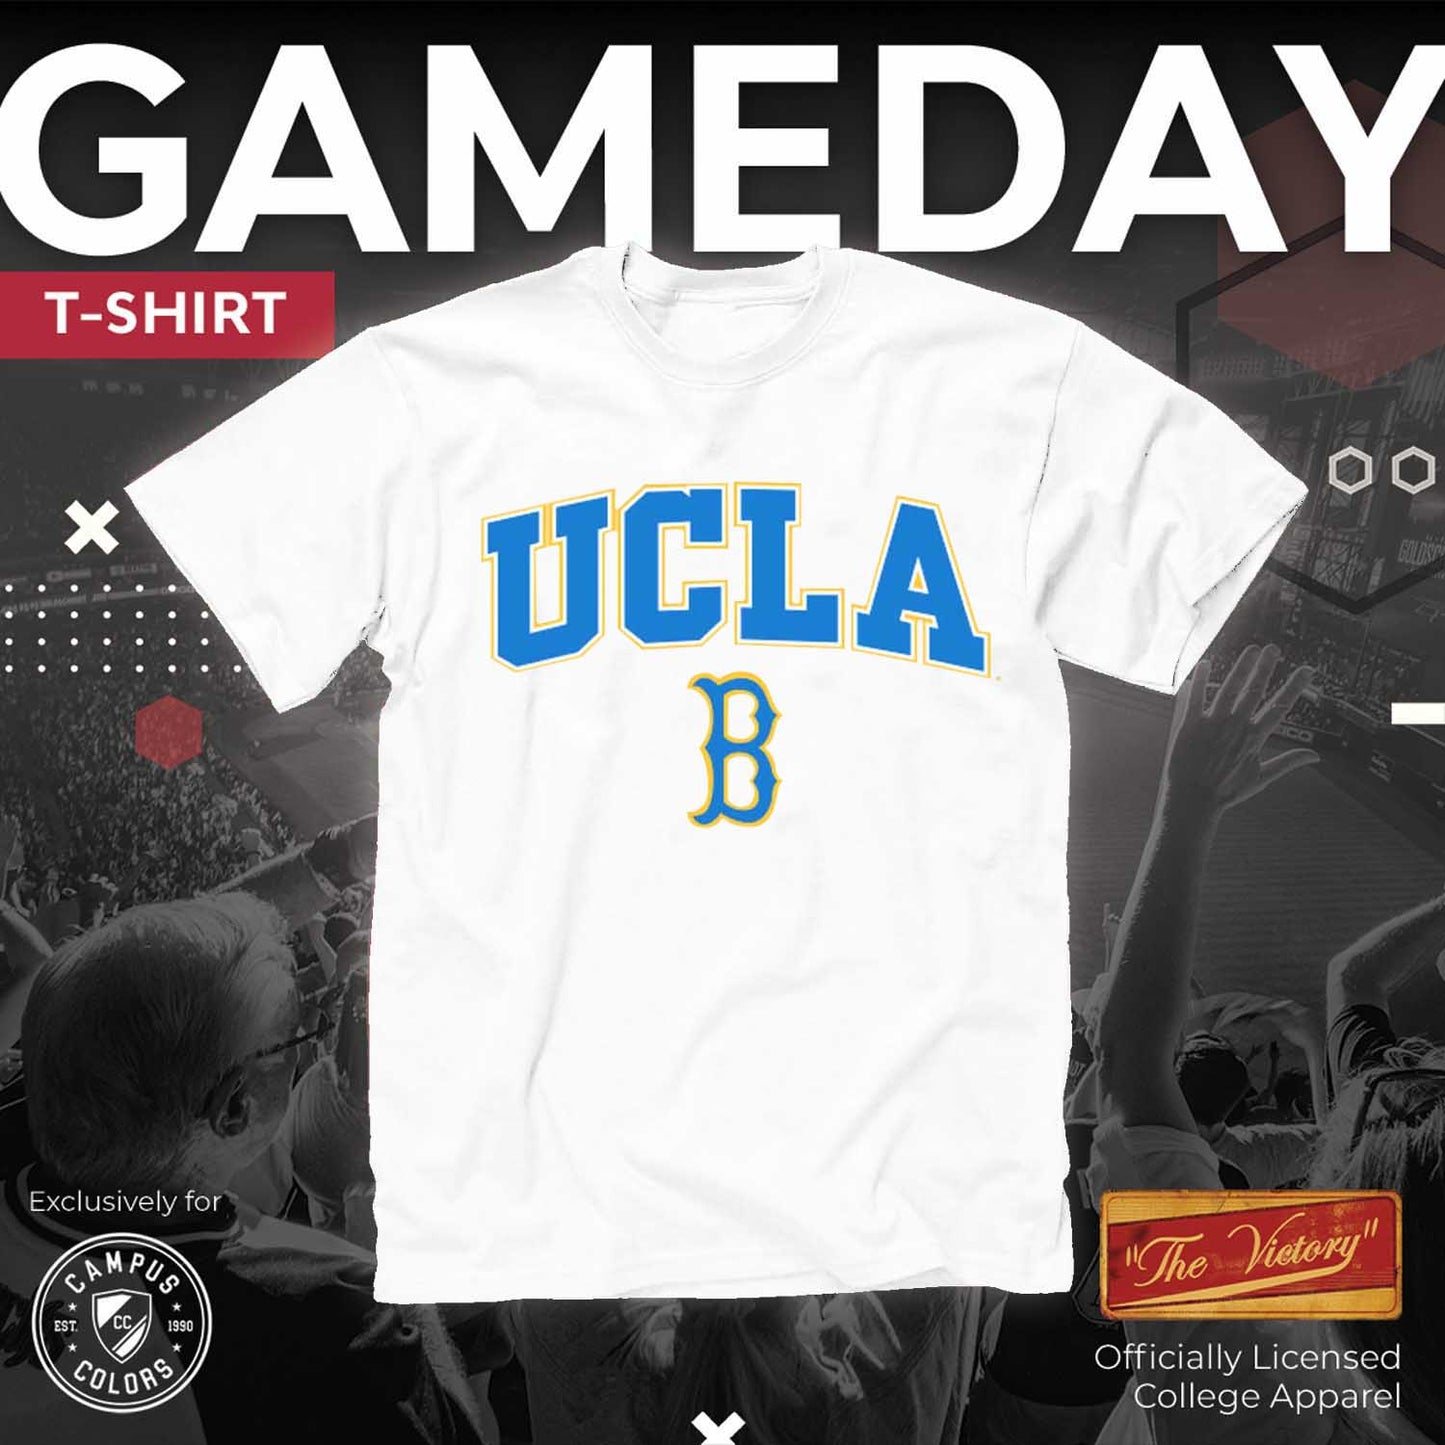 UCLA Bruins NCAA Adult Gameday Cotton T-Shirt - White